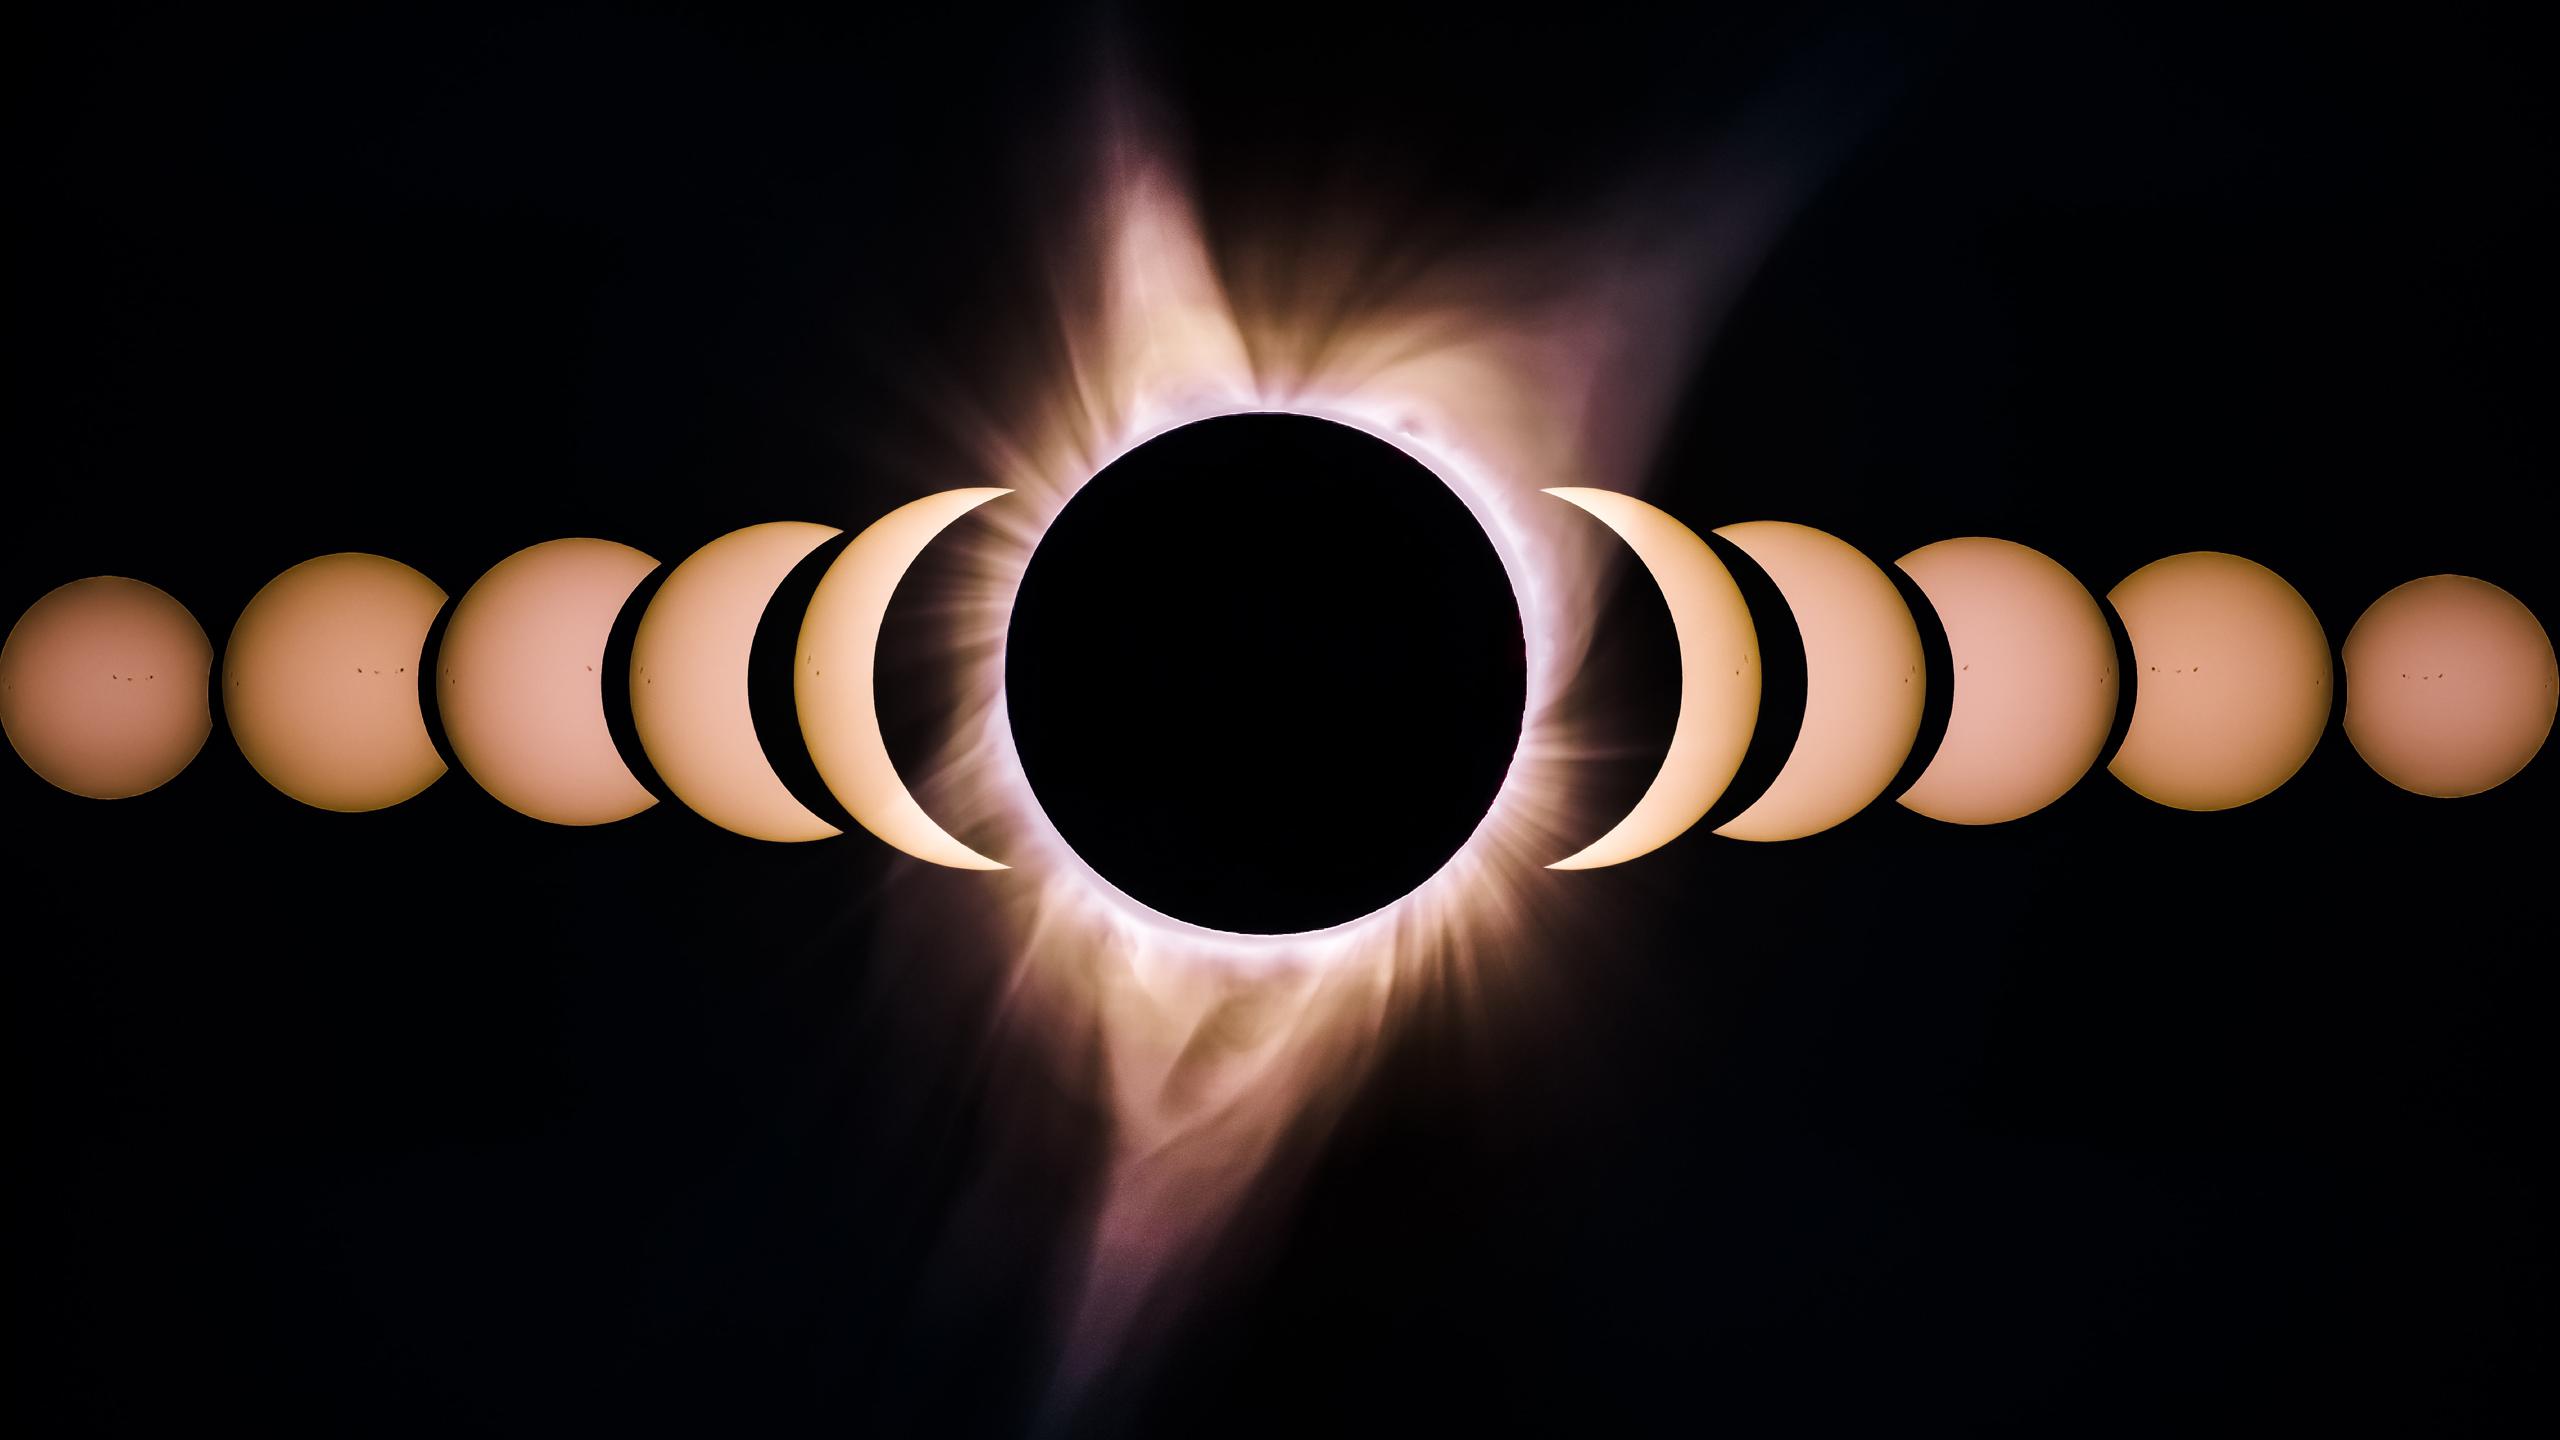 Eclipse 4K wallpapers for your desktop or mobile screen free and easy